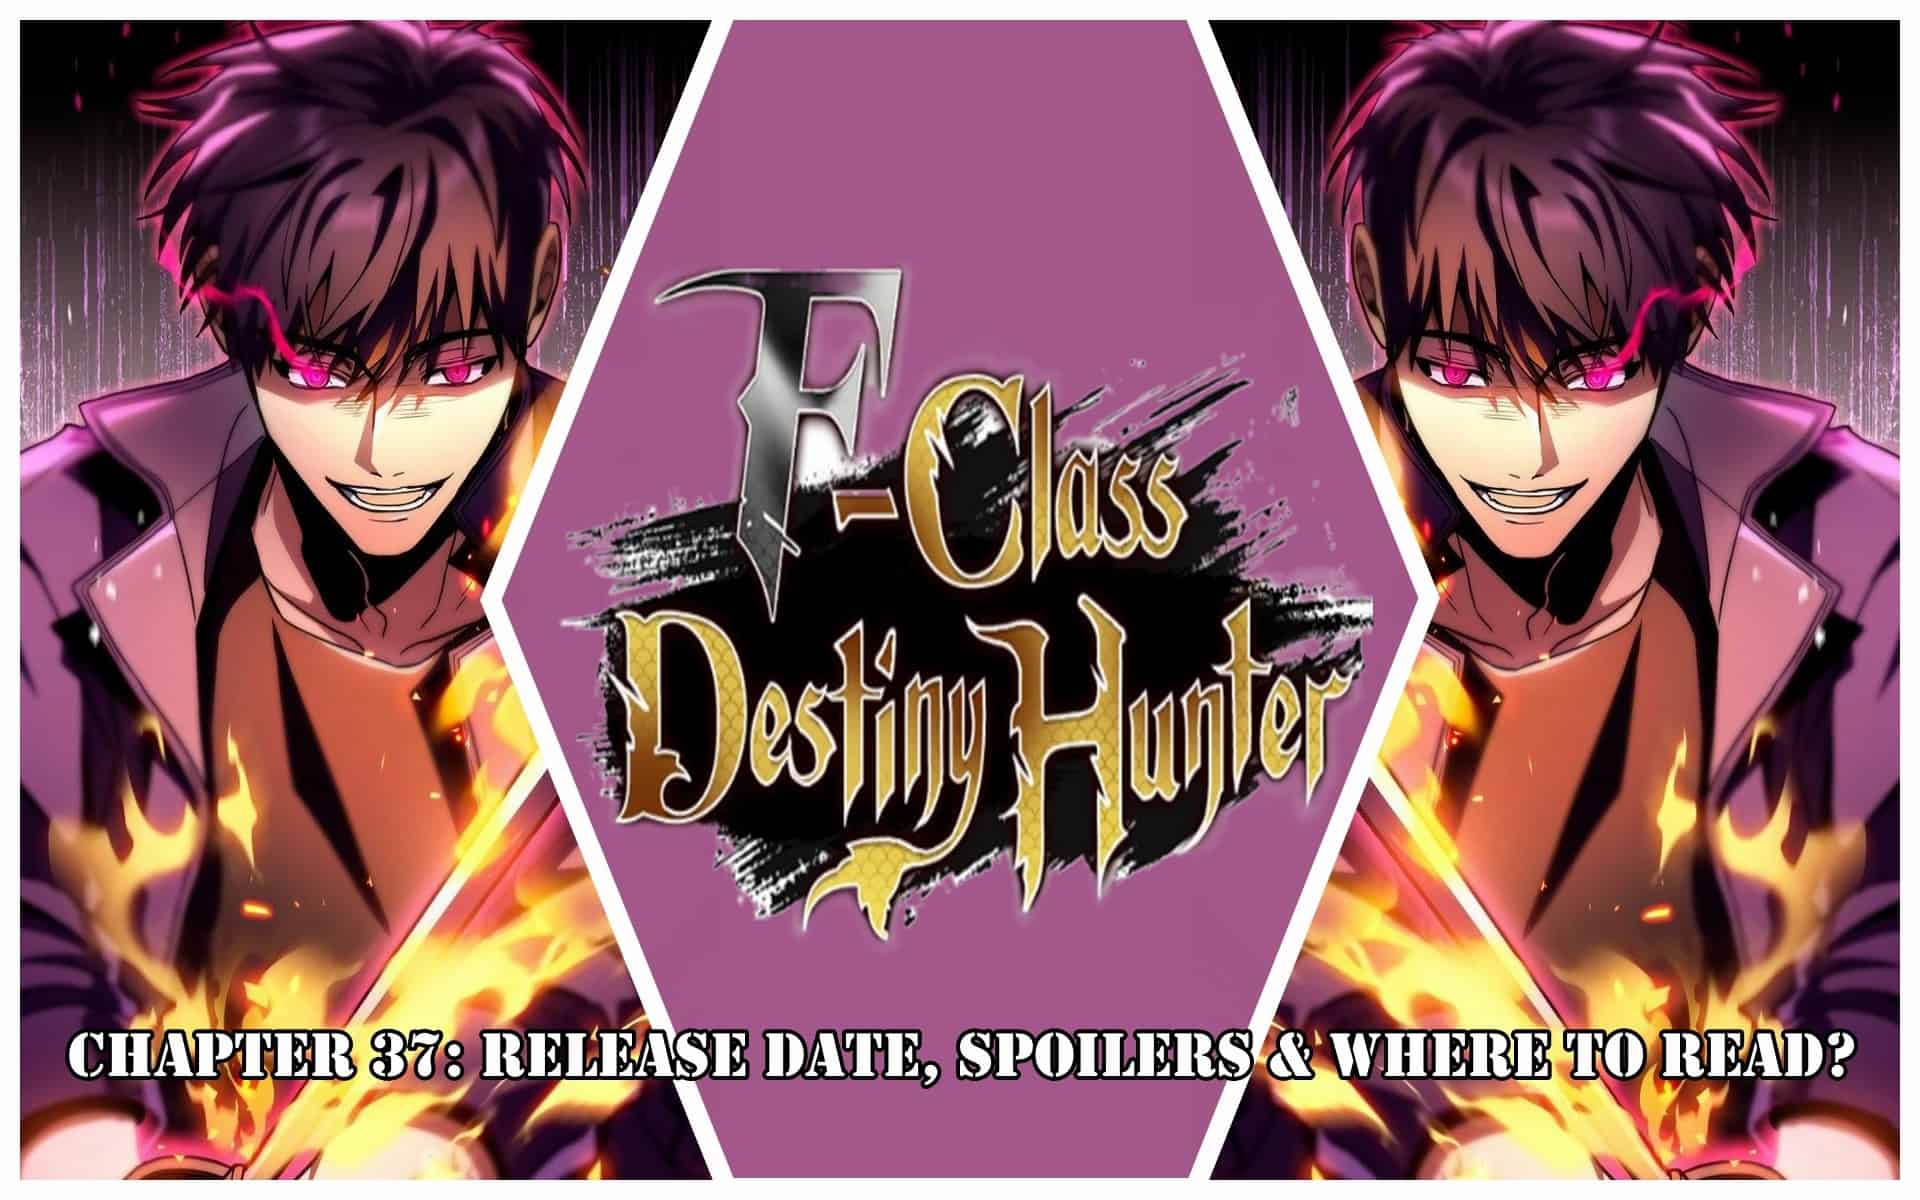 F-Class Destiny Hunter Chapter 37: Release Date, Spoilers & Where to Read?